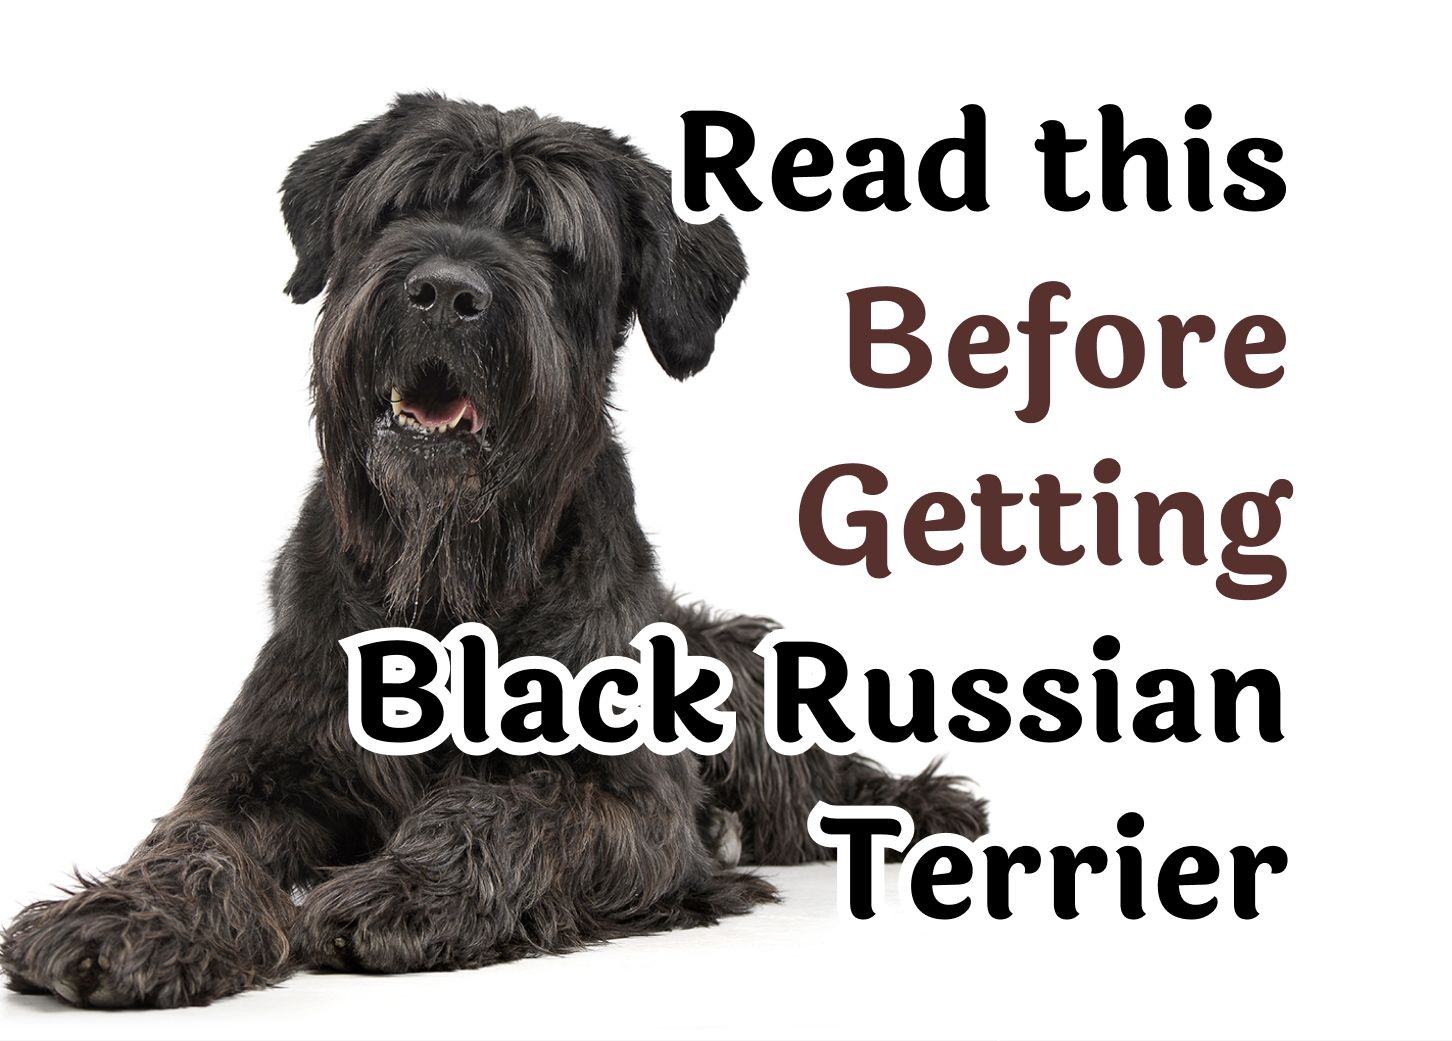 22 Questions To Consider Before Getting A Black Russian Terrier